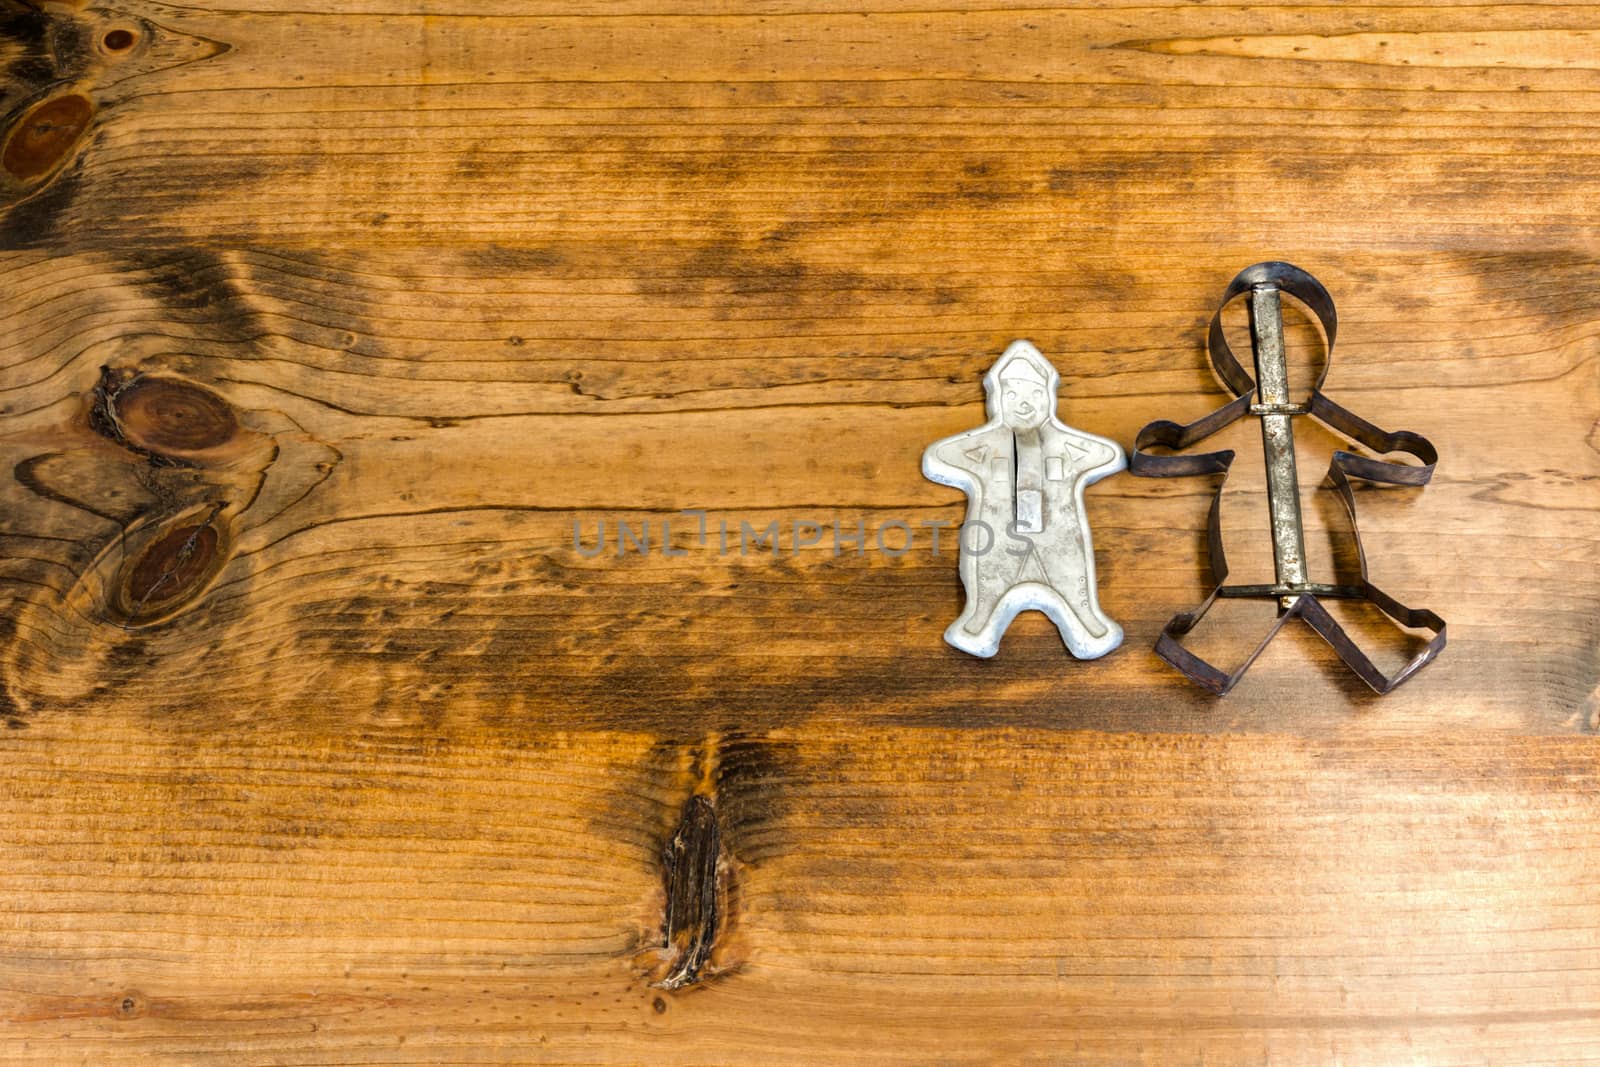 Tin Cookie Cutters Sitting on Wooden Table With Knots